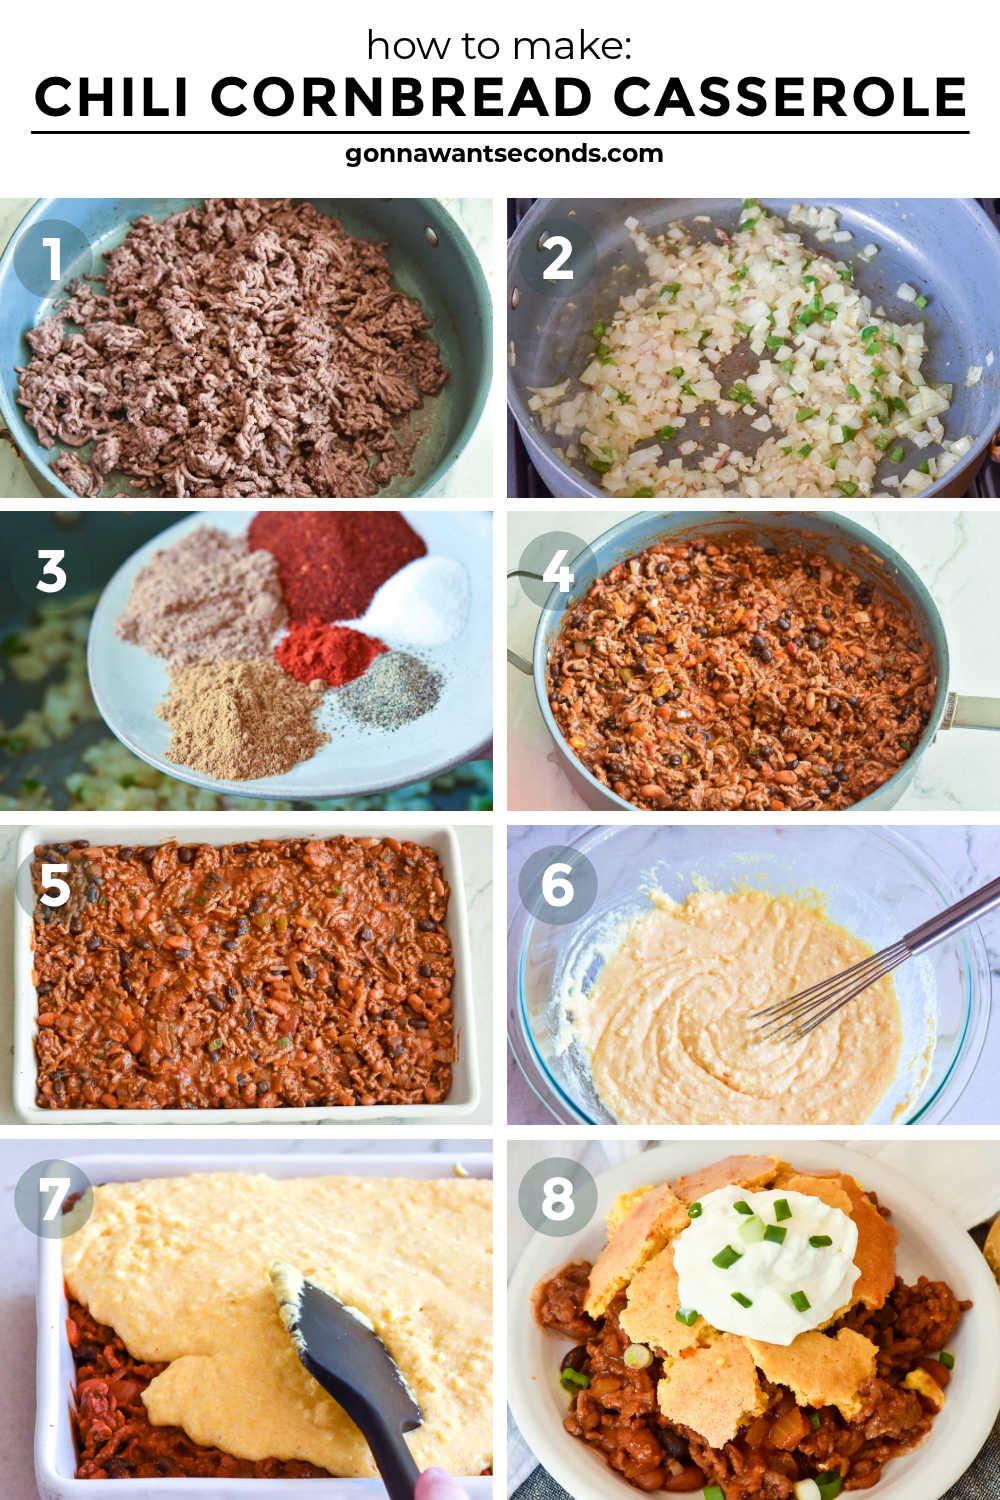 Step by step how to make chili cornbread casserole